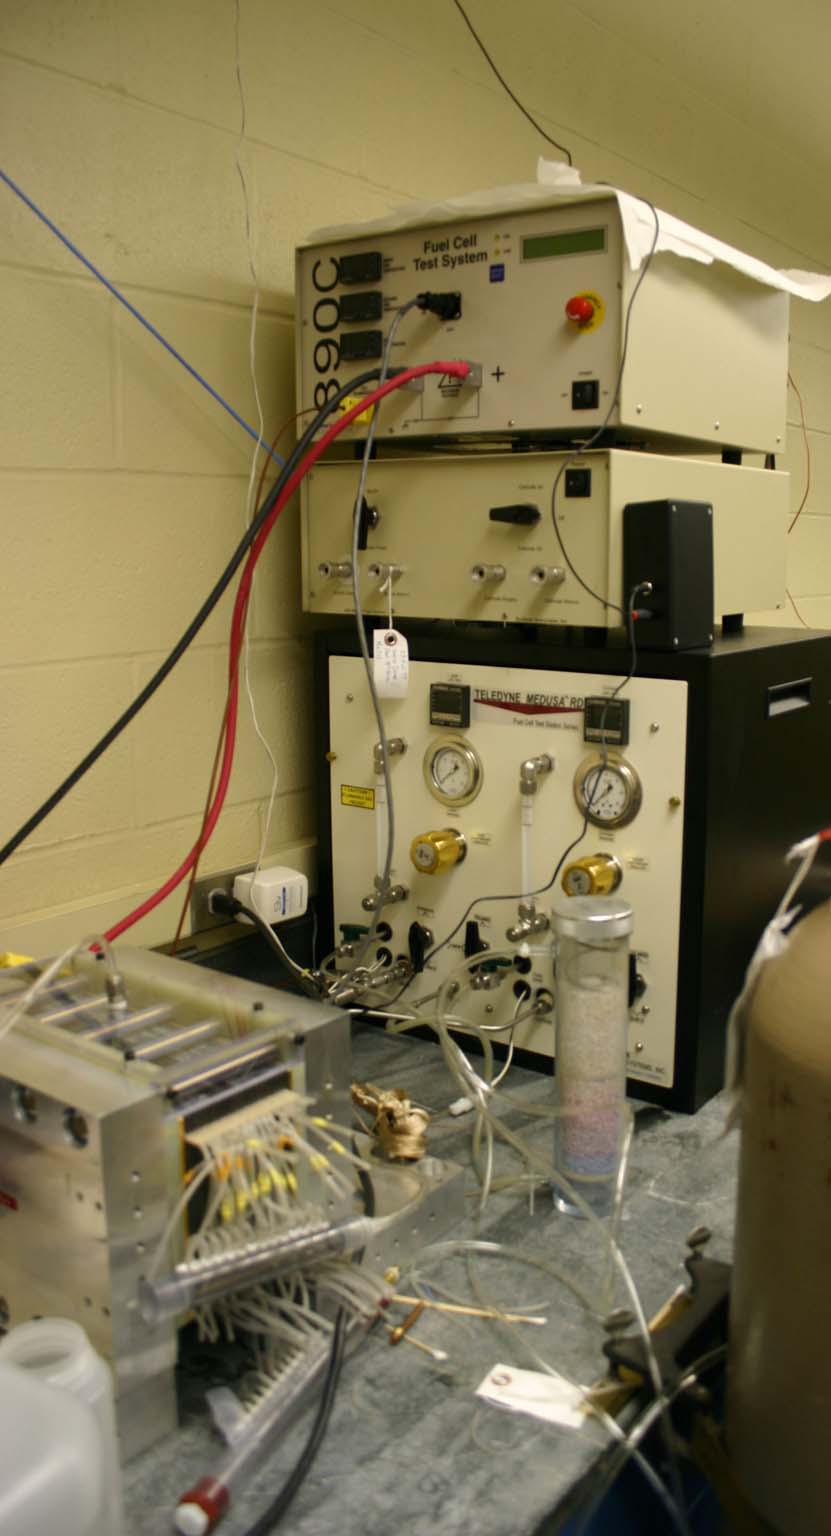 Scribner Fuel cell test stand